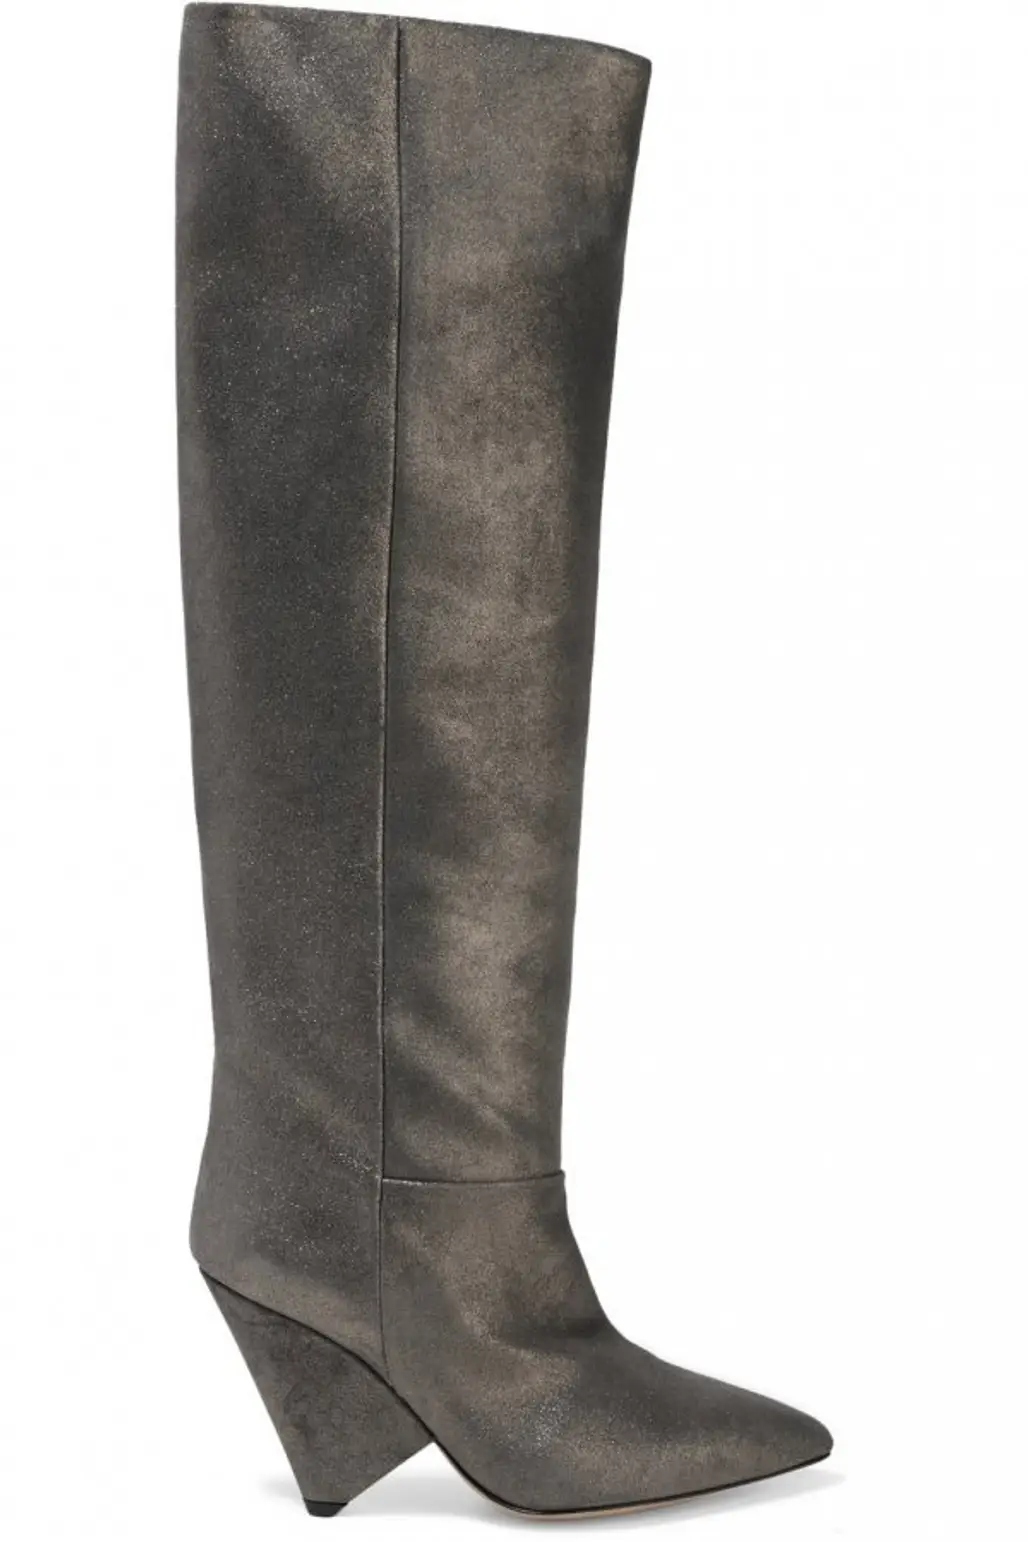 footwear, boot, riding boot, suede, shoe,